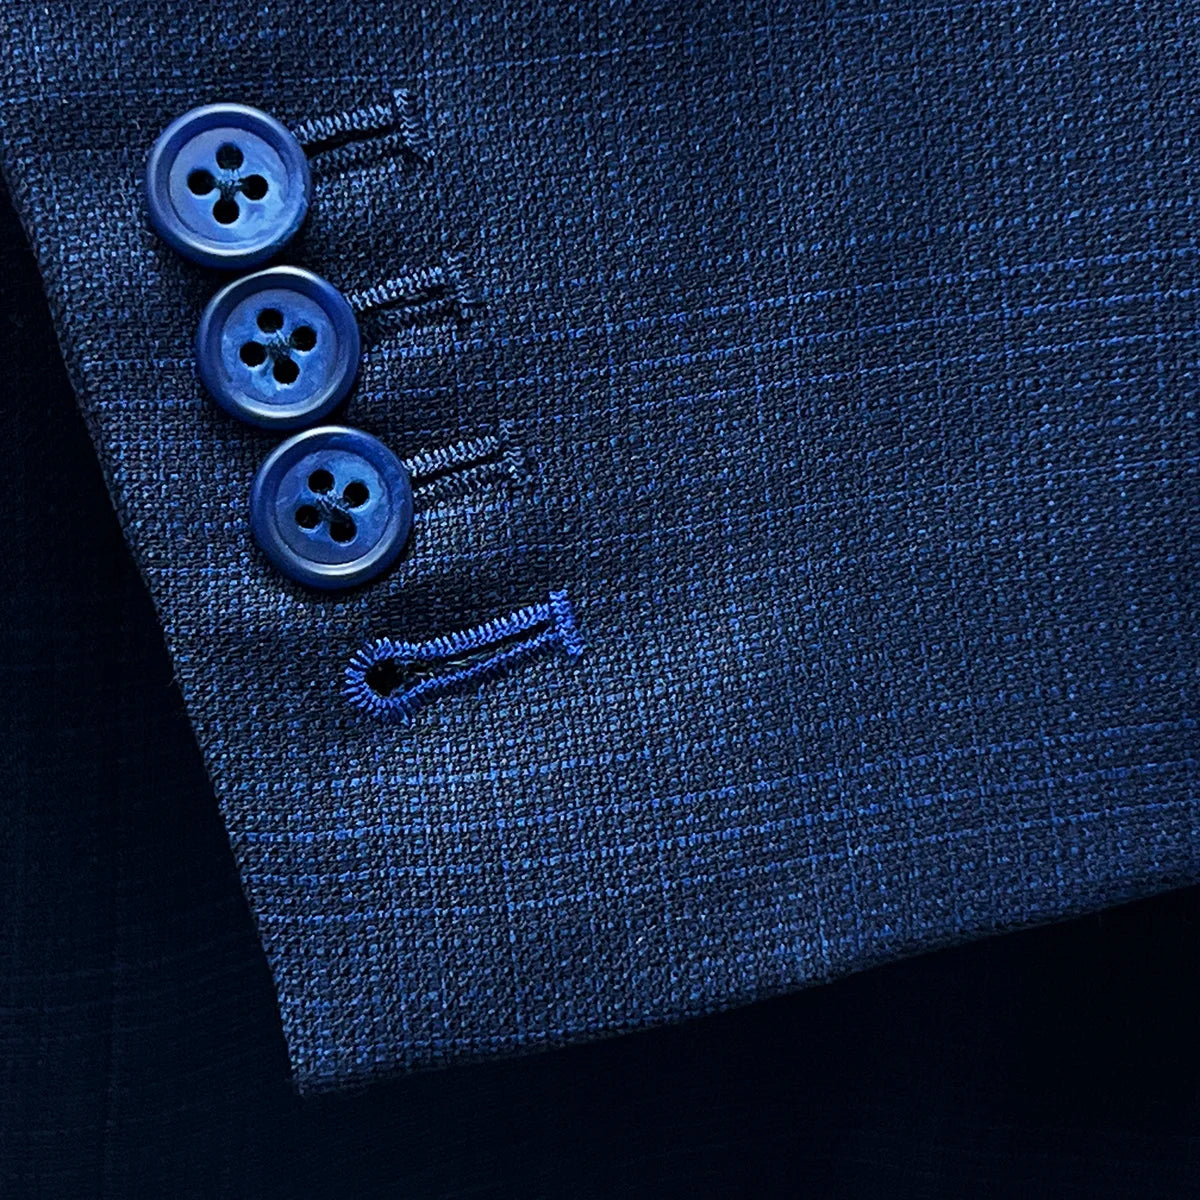 Close-up of the functional sleeve buttonholes with royal blue contrast stitching.